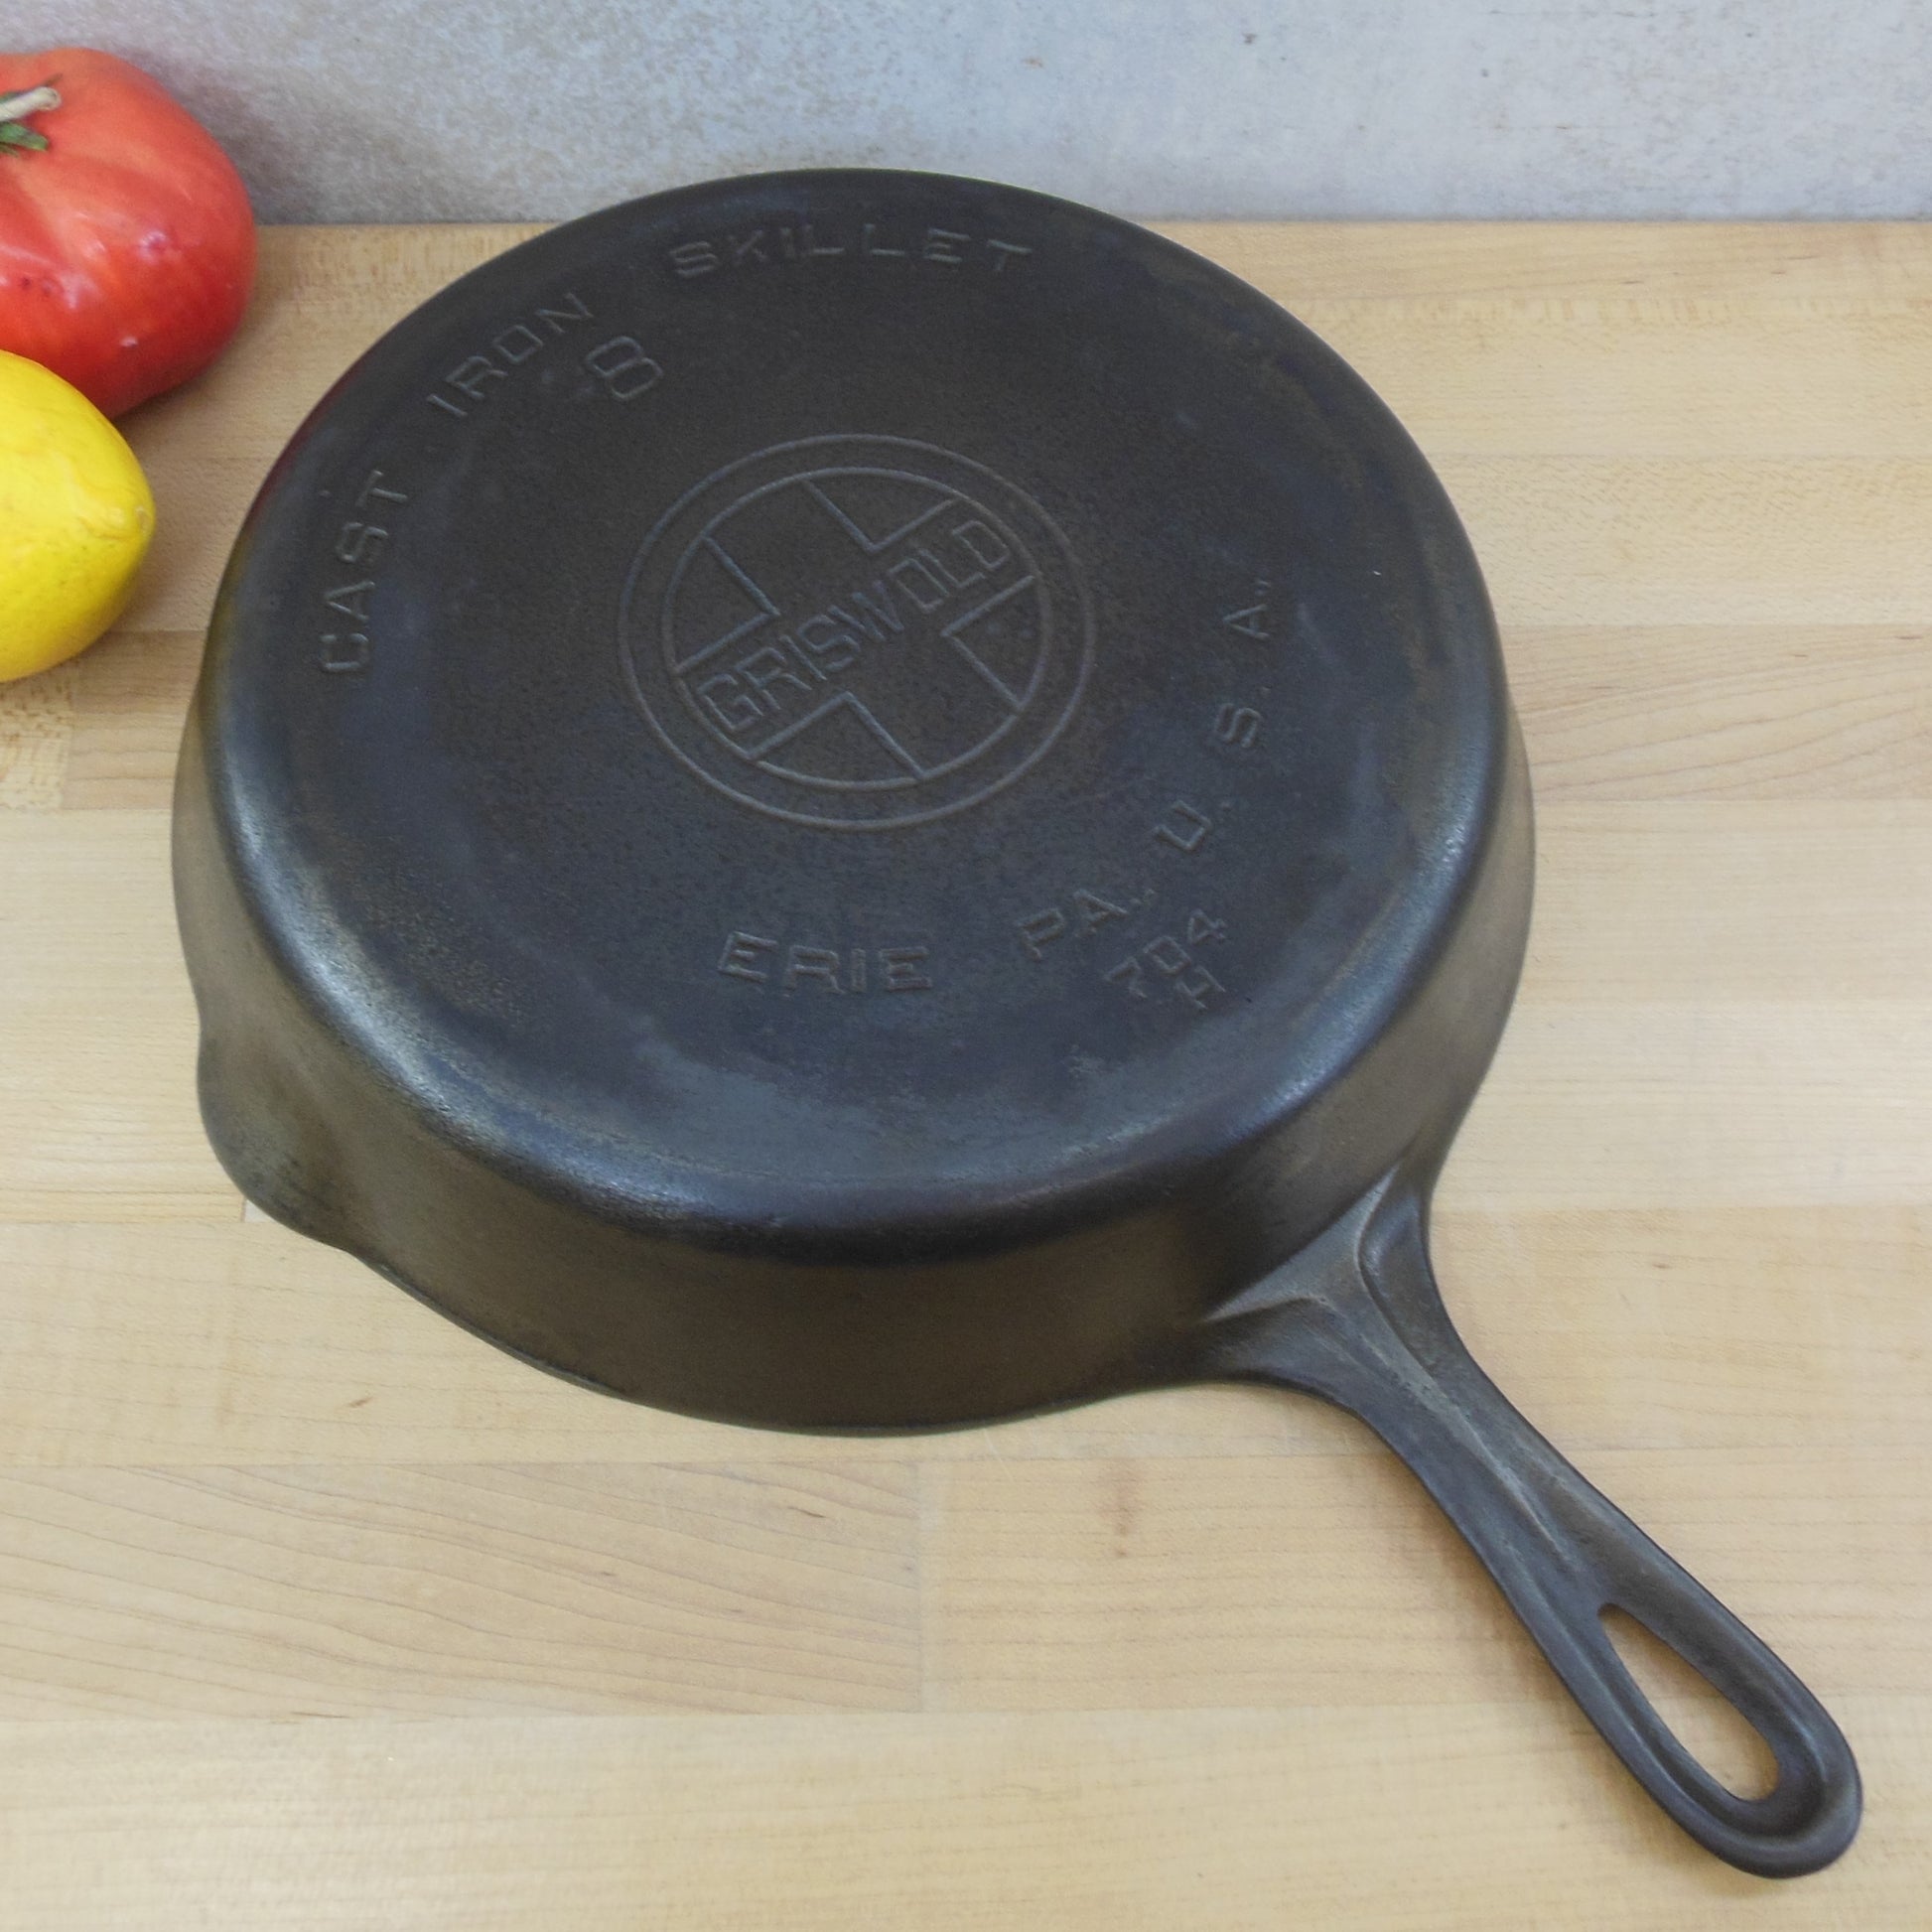 1930's Griswold #8 Cast Iron Skillet with Large Block Logo and Smooth – Cast  & Clara Bell